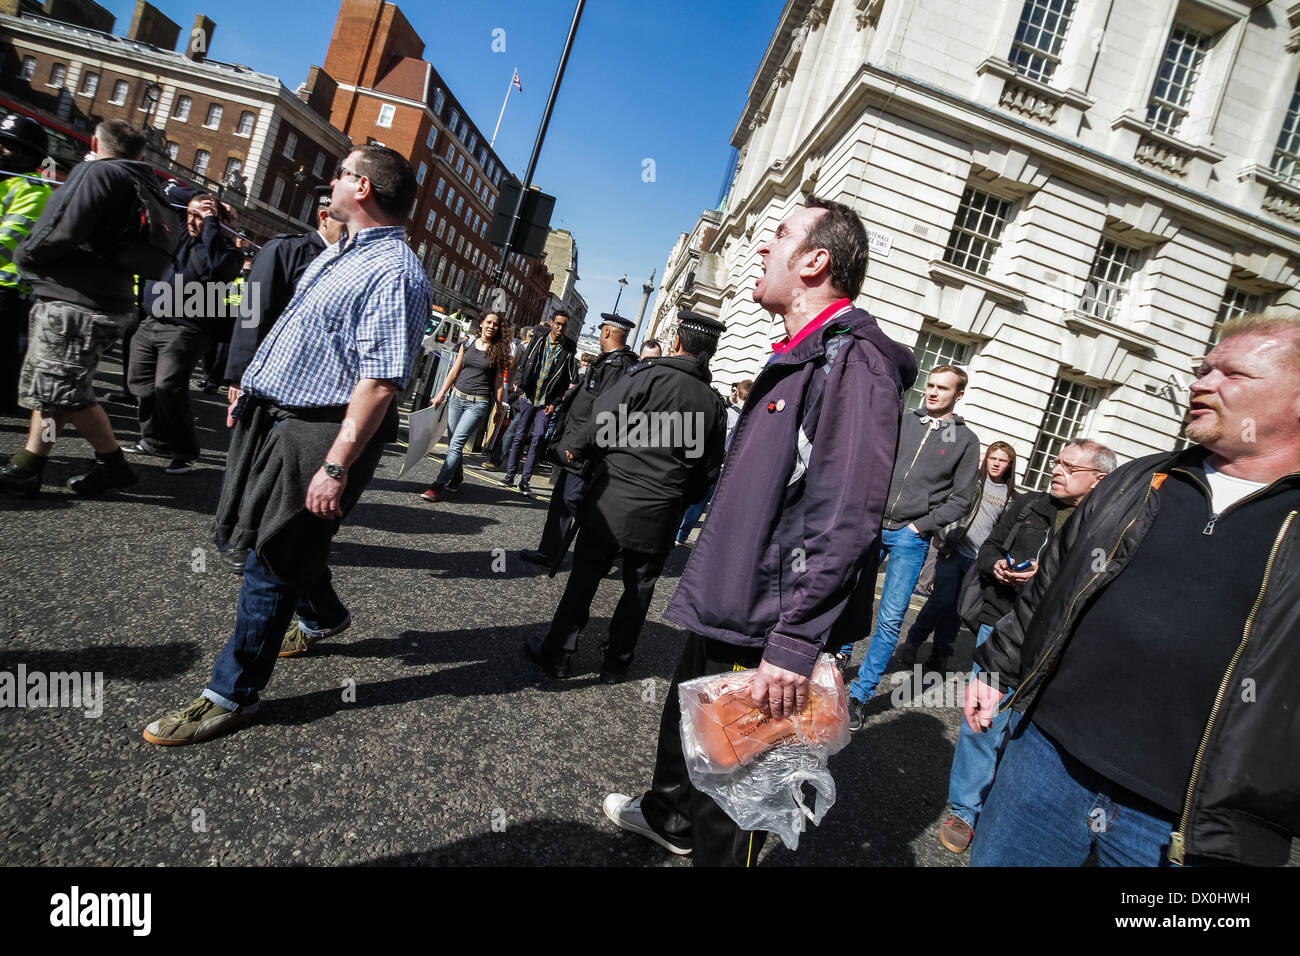 Anti-Fascist (UAF) groups clash with EVF protest march in London Stock Photo